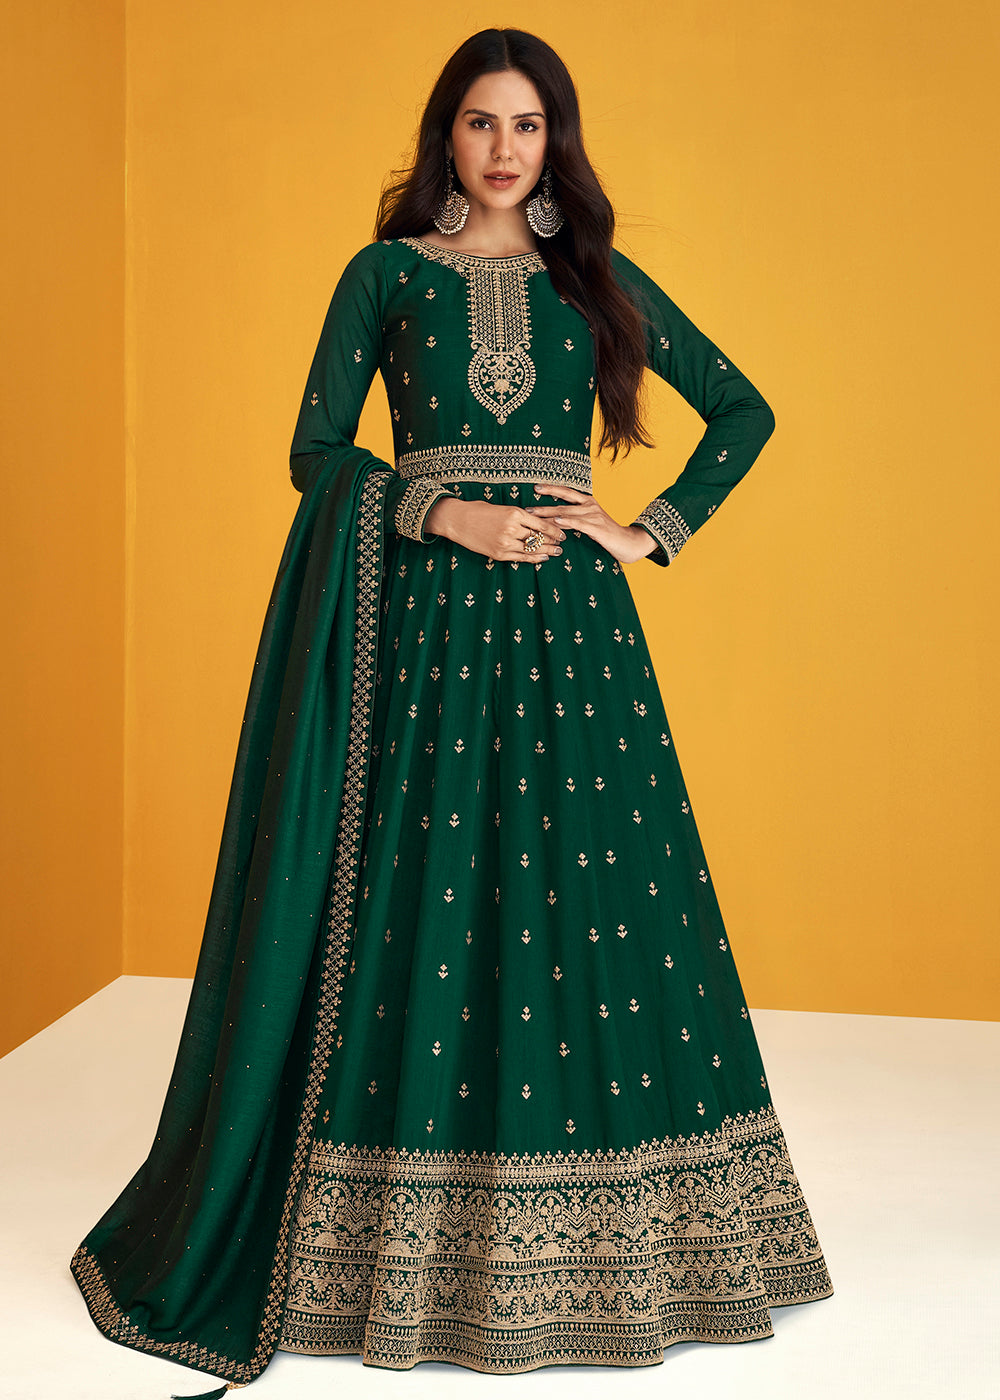 Shop Now Amazing Green Silk Festive Anarkali Suit Online featuring Sonam Bajwa at Empress Clothing in USA.